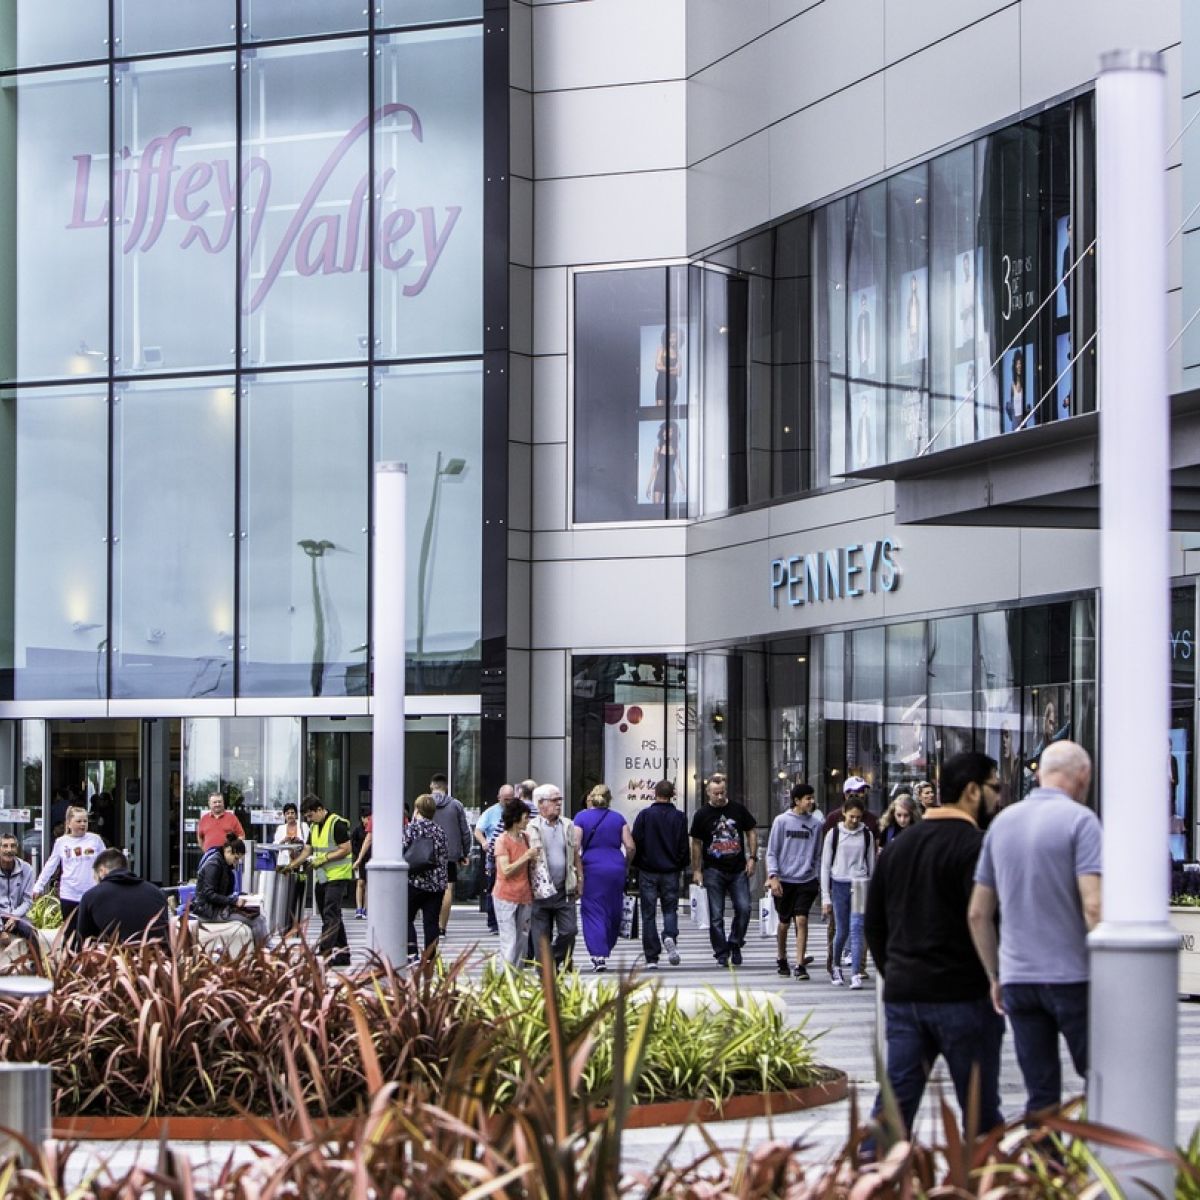 clarks liffey valley opening hours off 